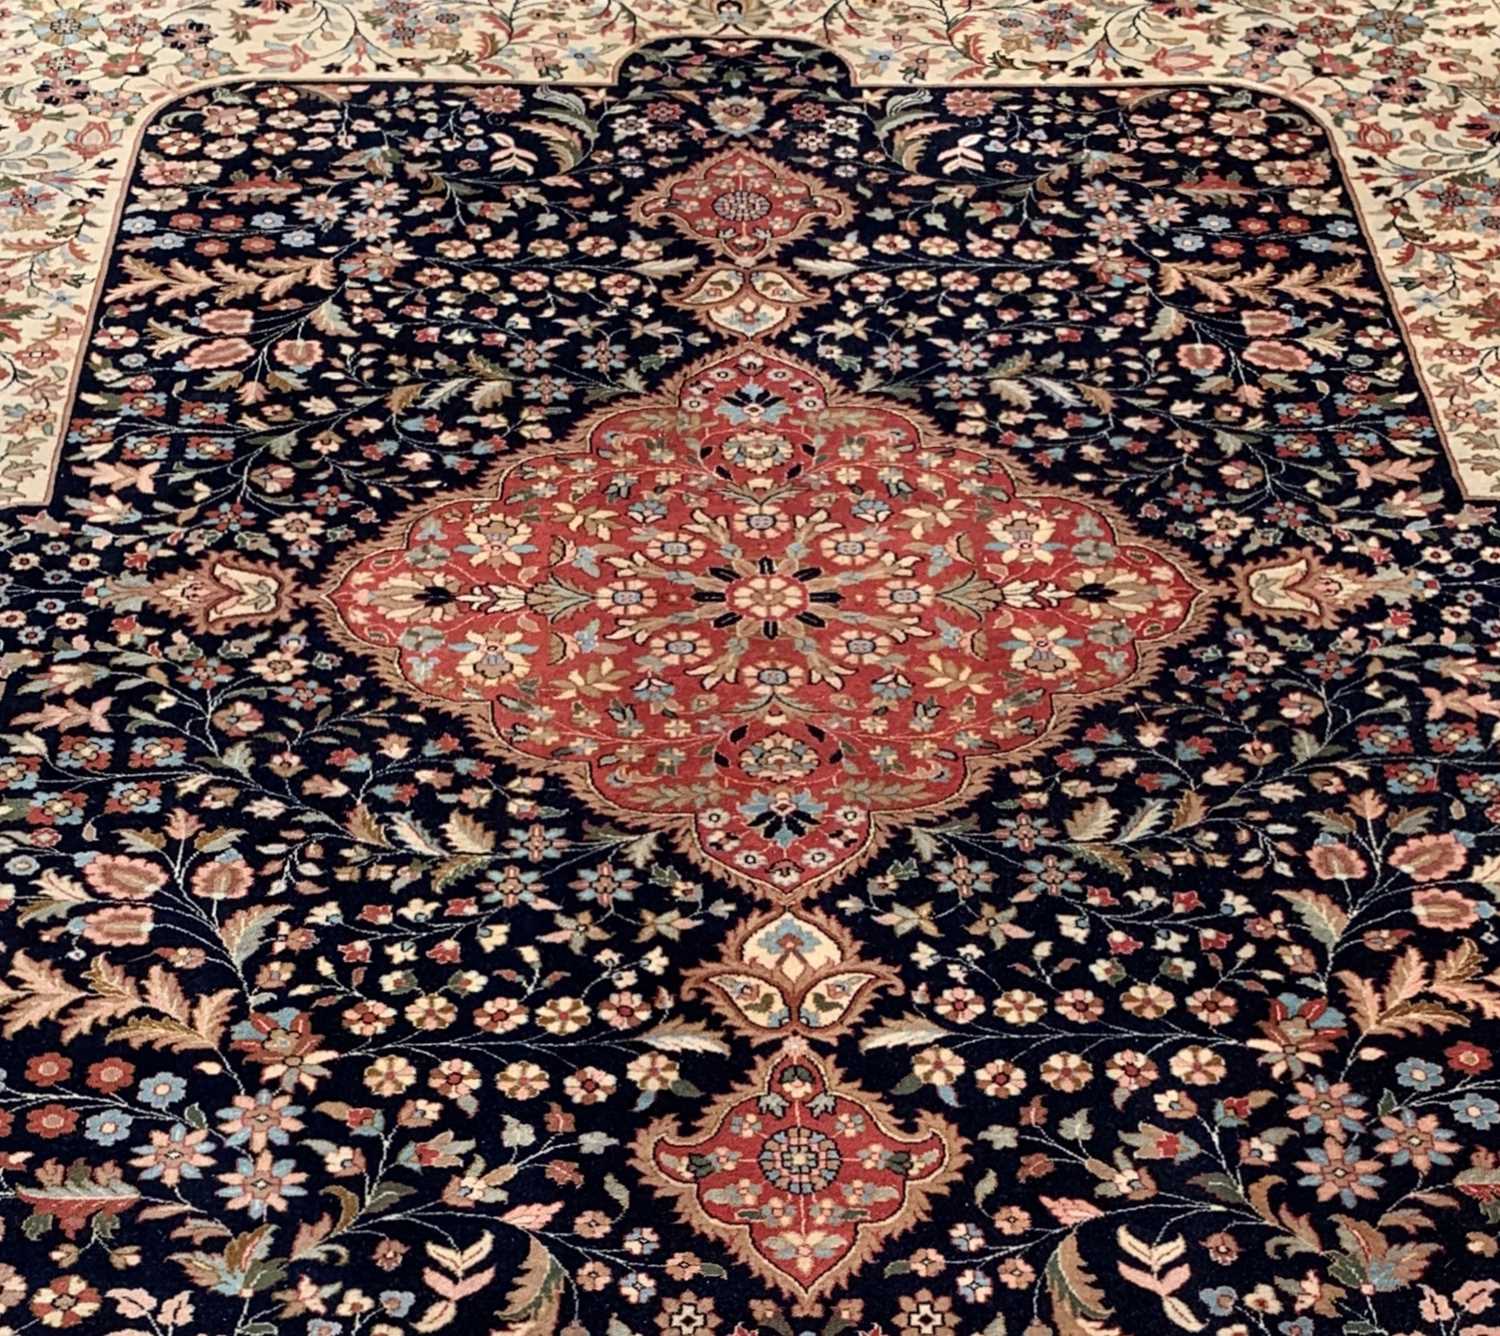 MODERN ORIENTAL CARPET, red central medallion with mosque lamps, on a dark field with floral ivory - Image 2 of 7